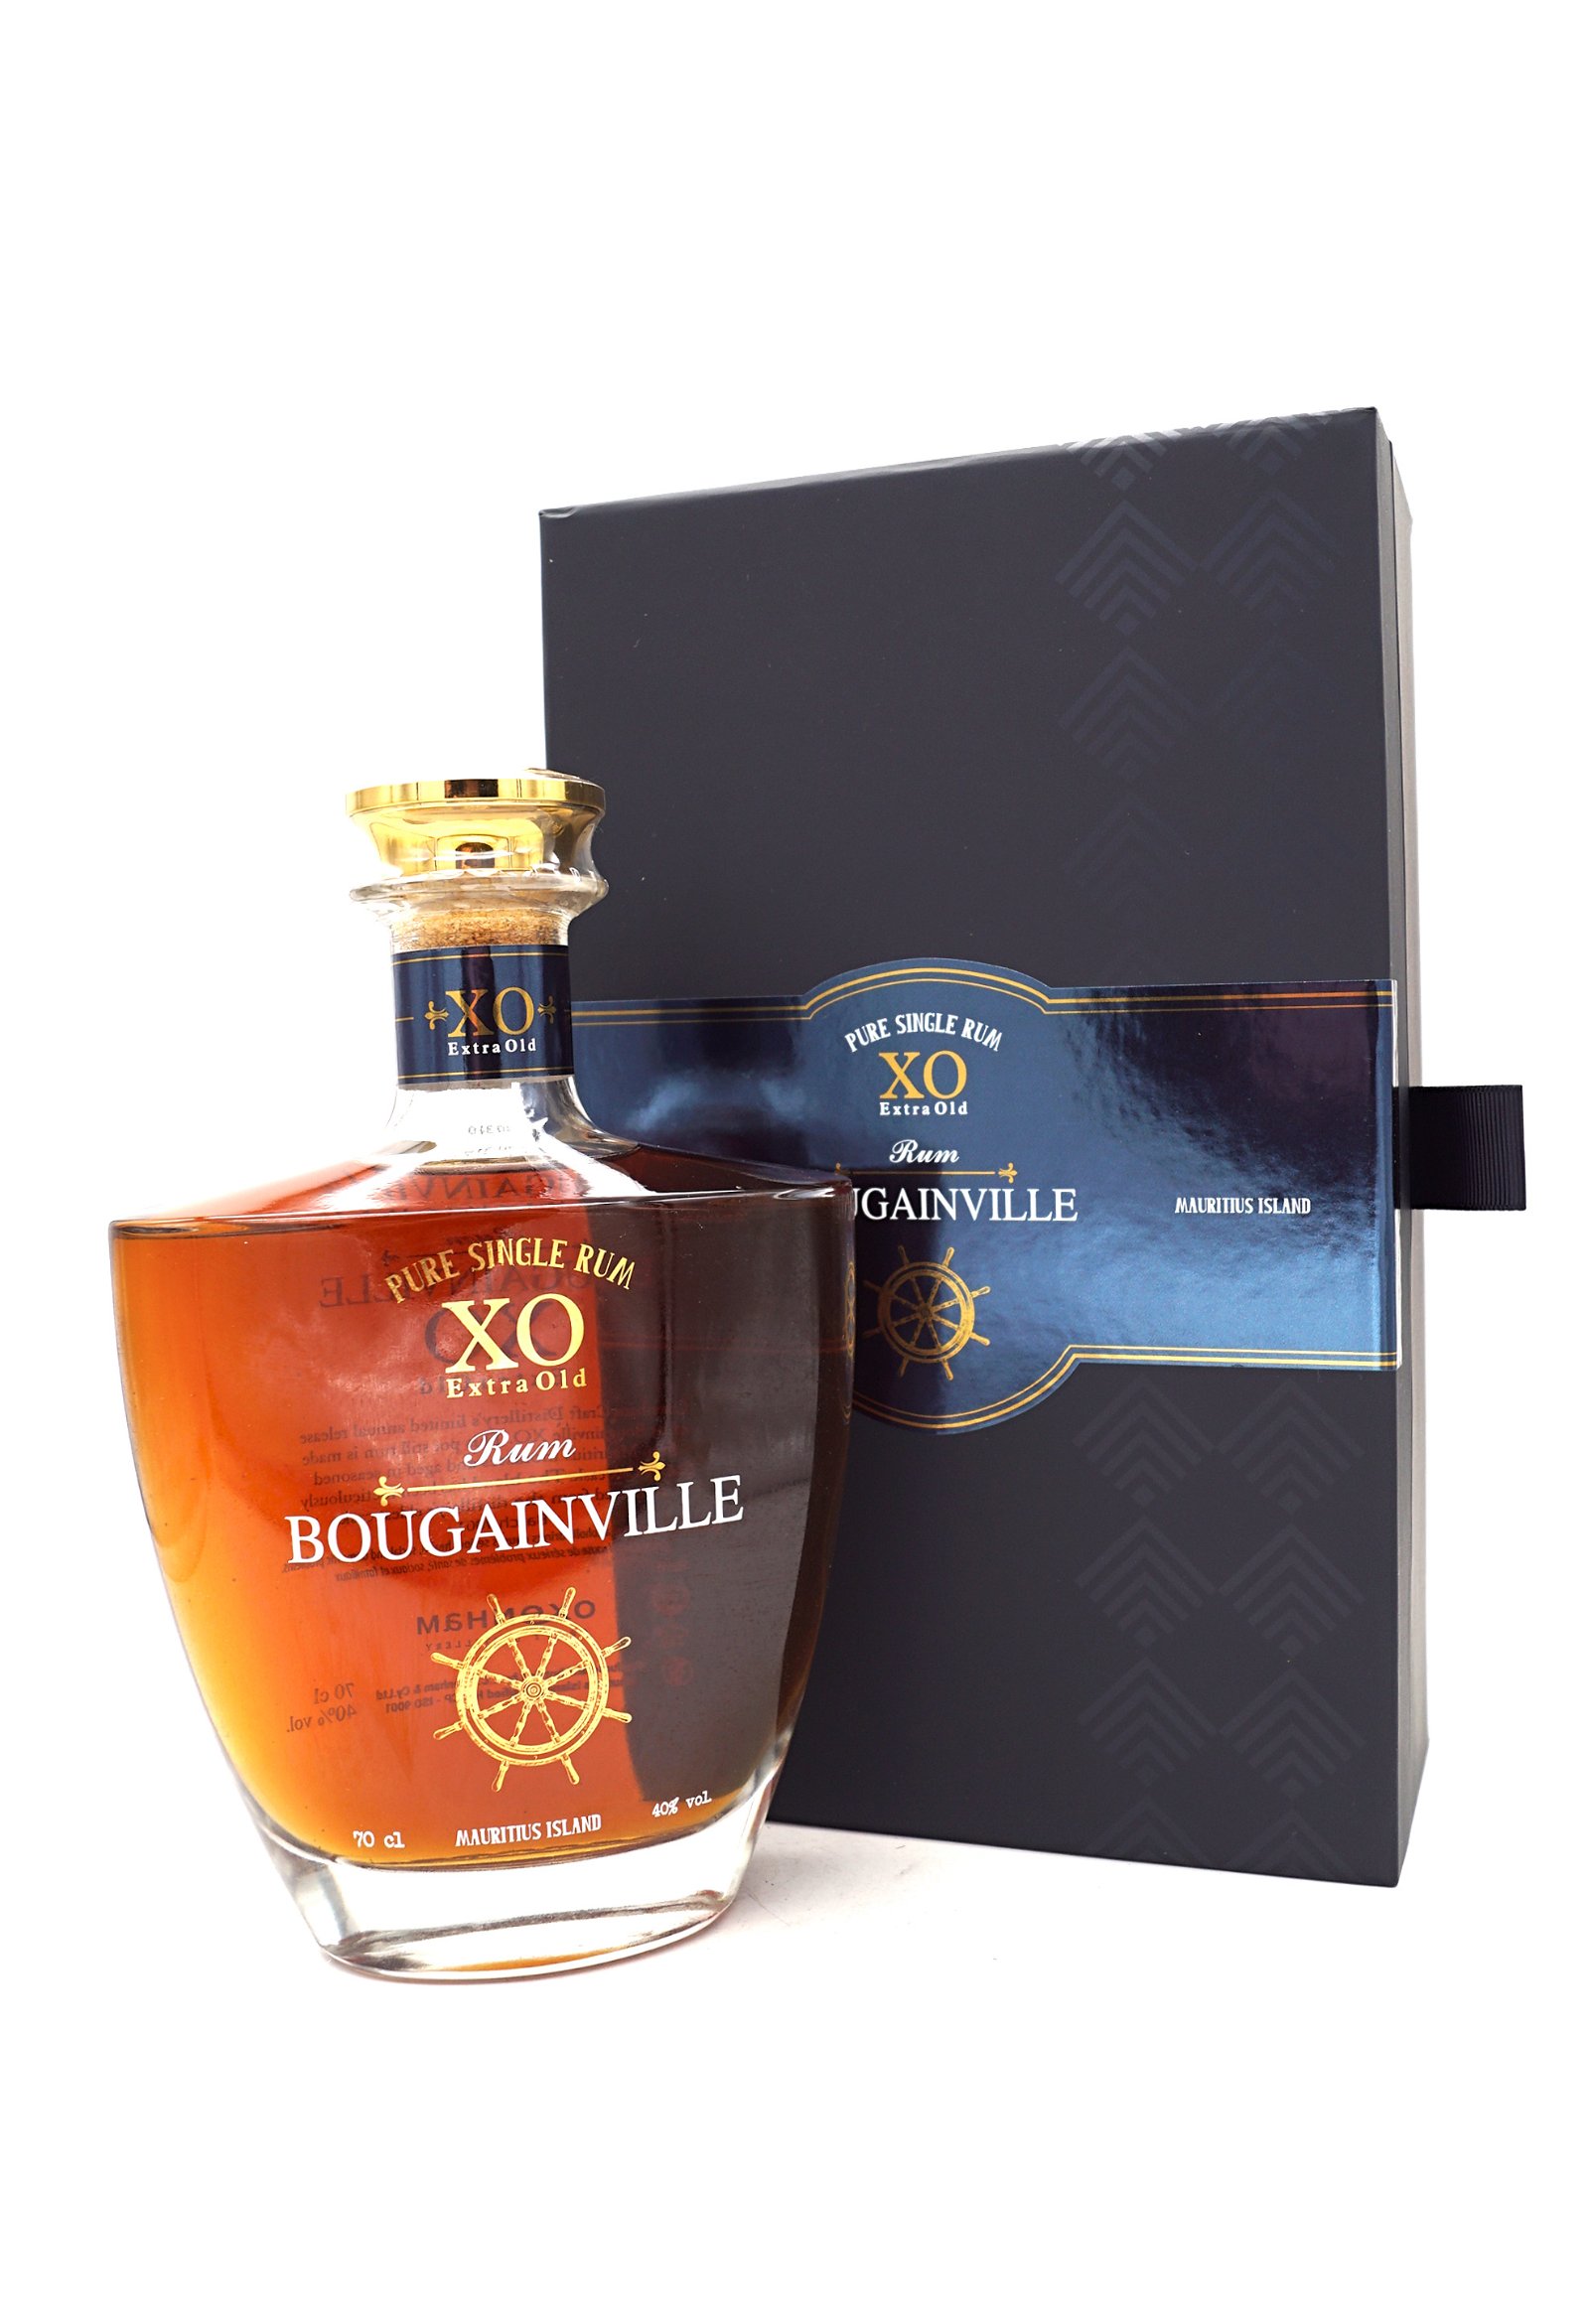 Bougainville XO Extra Old Pure Single Rum